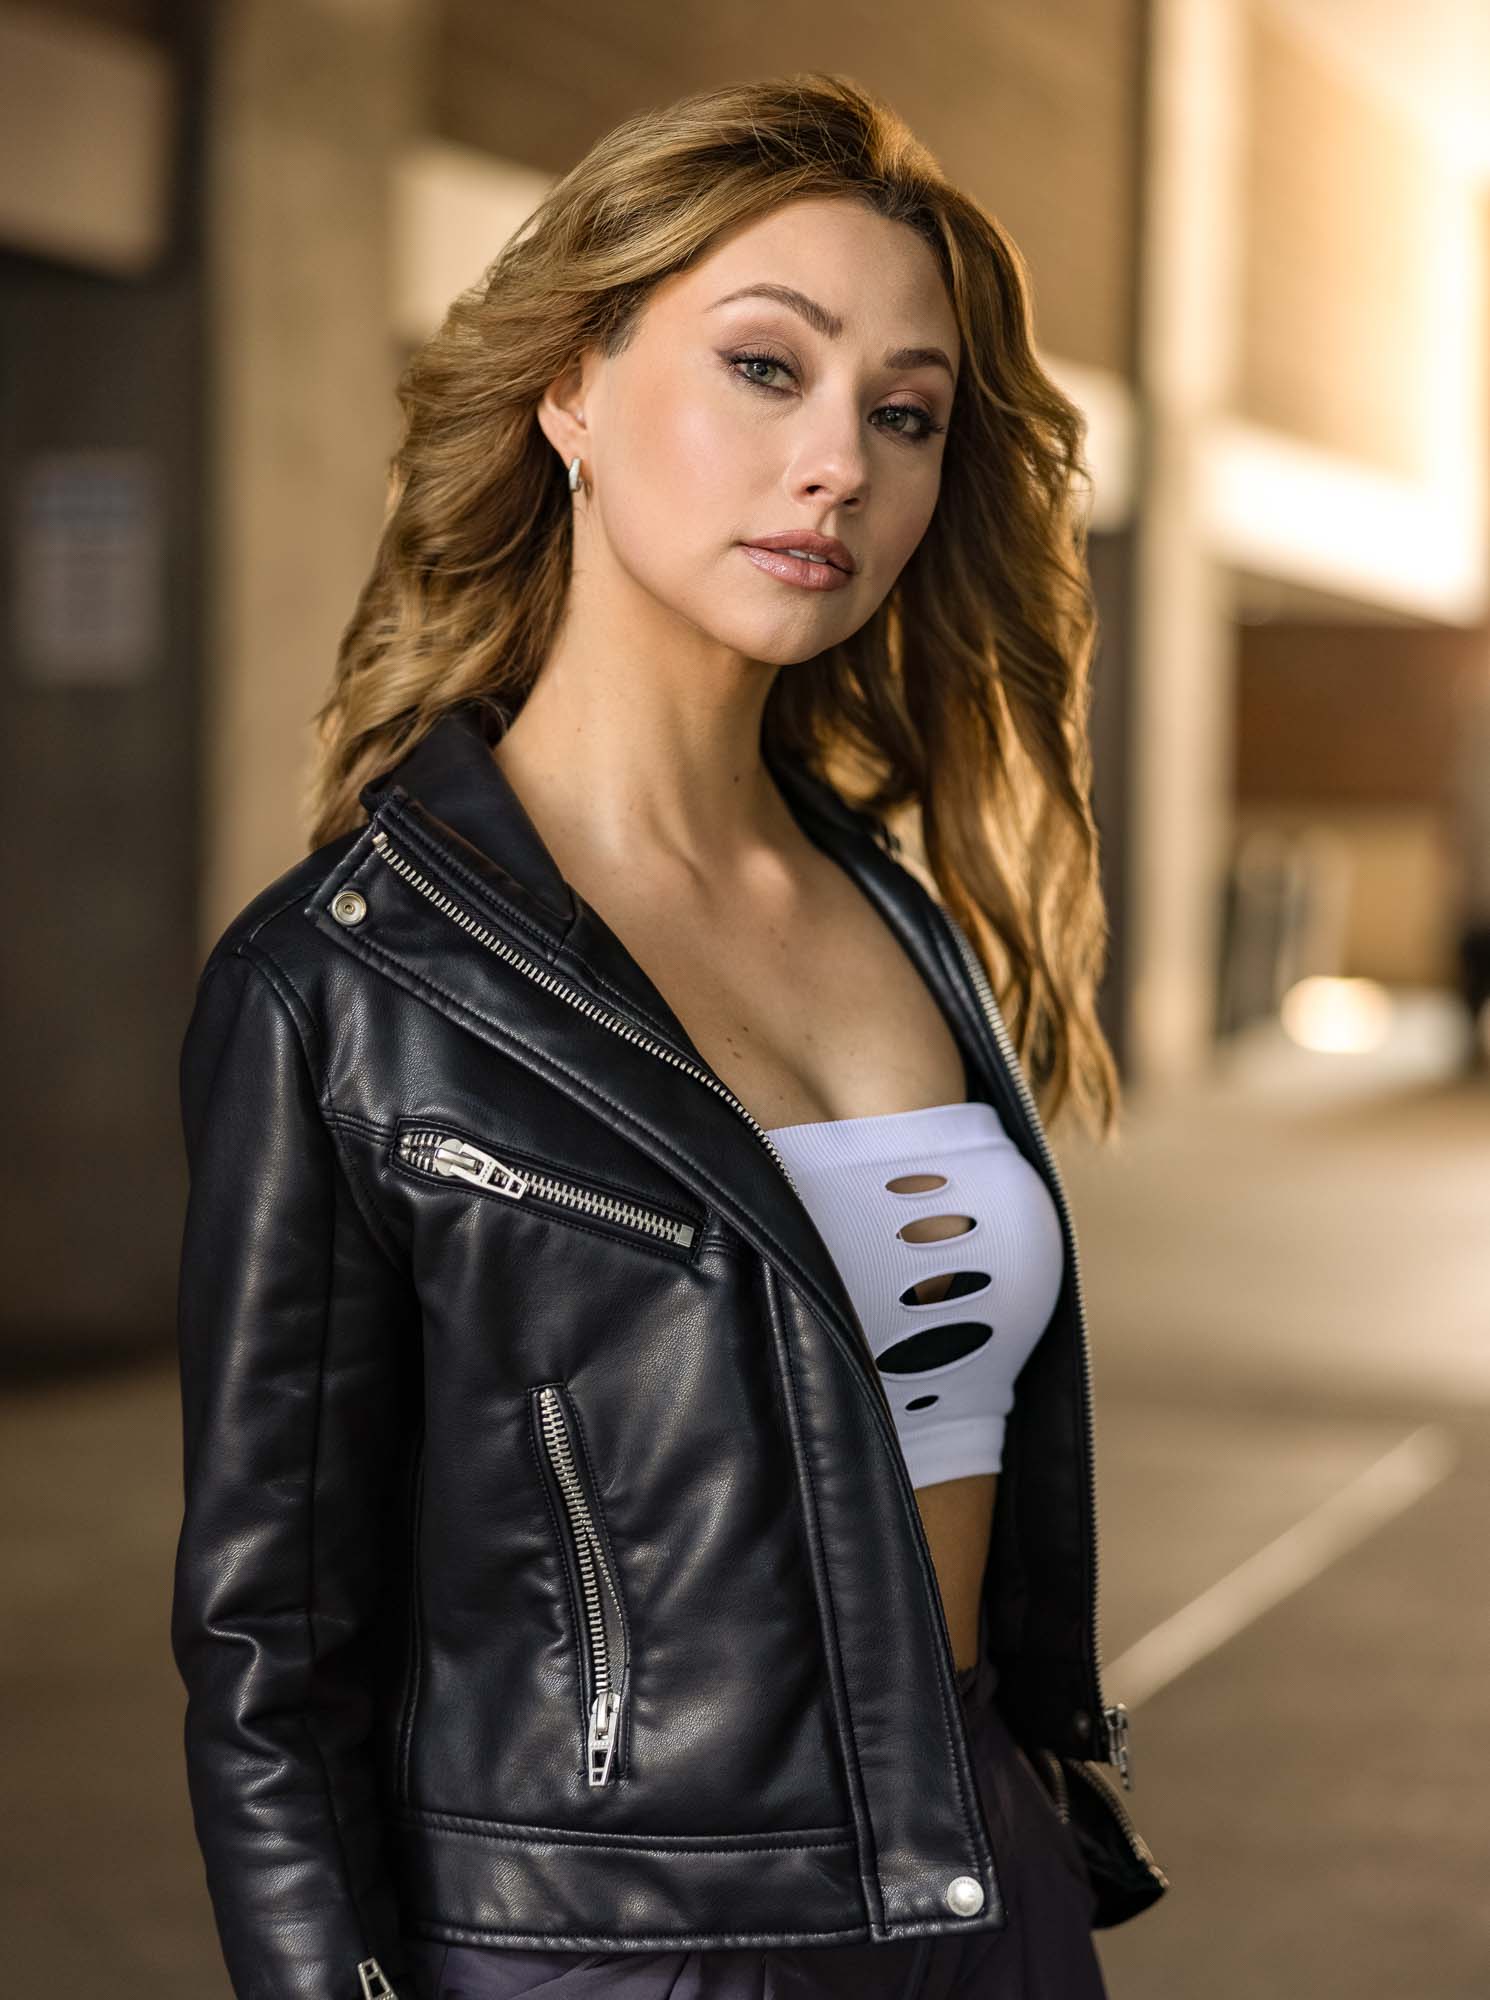 Denver fashion model in leather jacket sexy